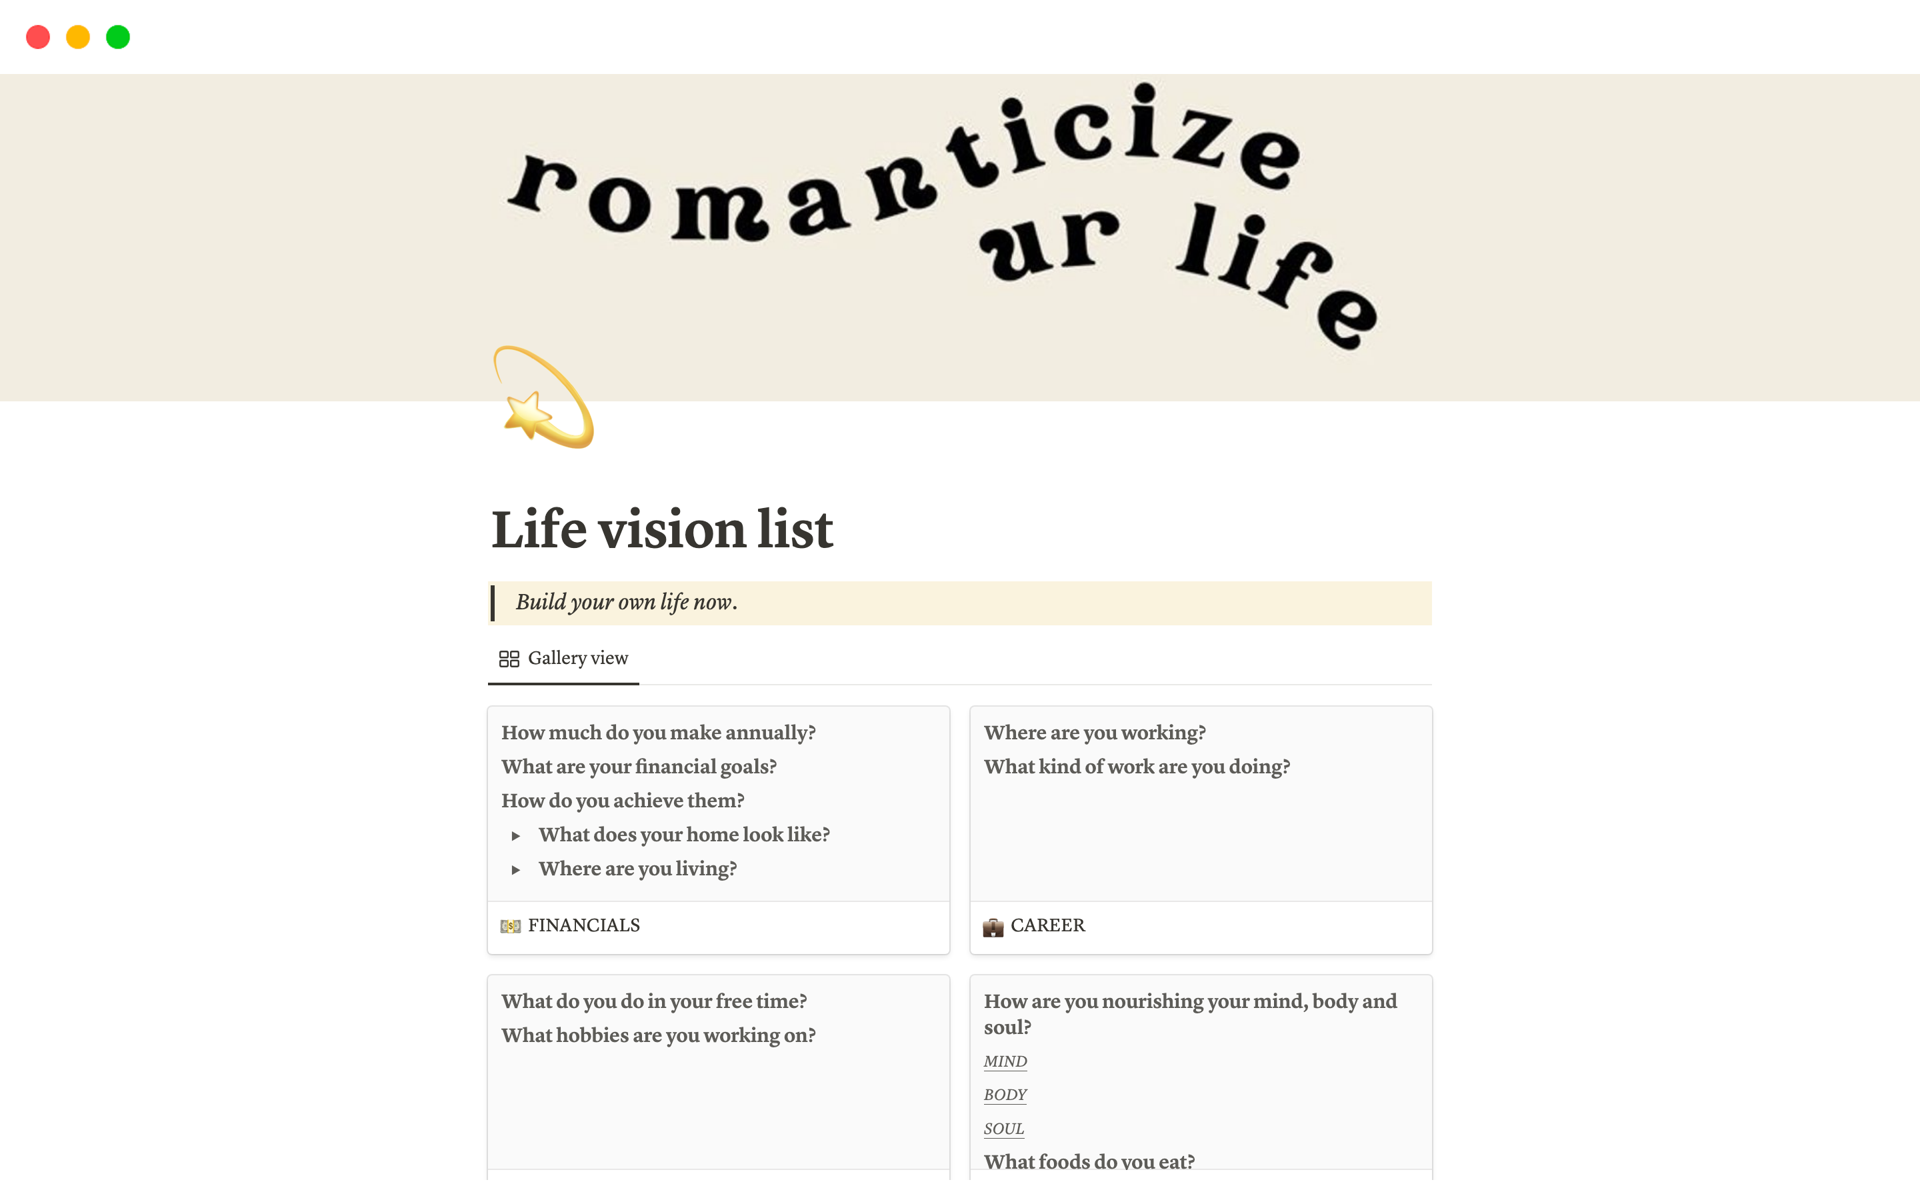 A vision list for the life of your dreams. This template contains a gallery board with many aspects of life to help you design your dream future right now.